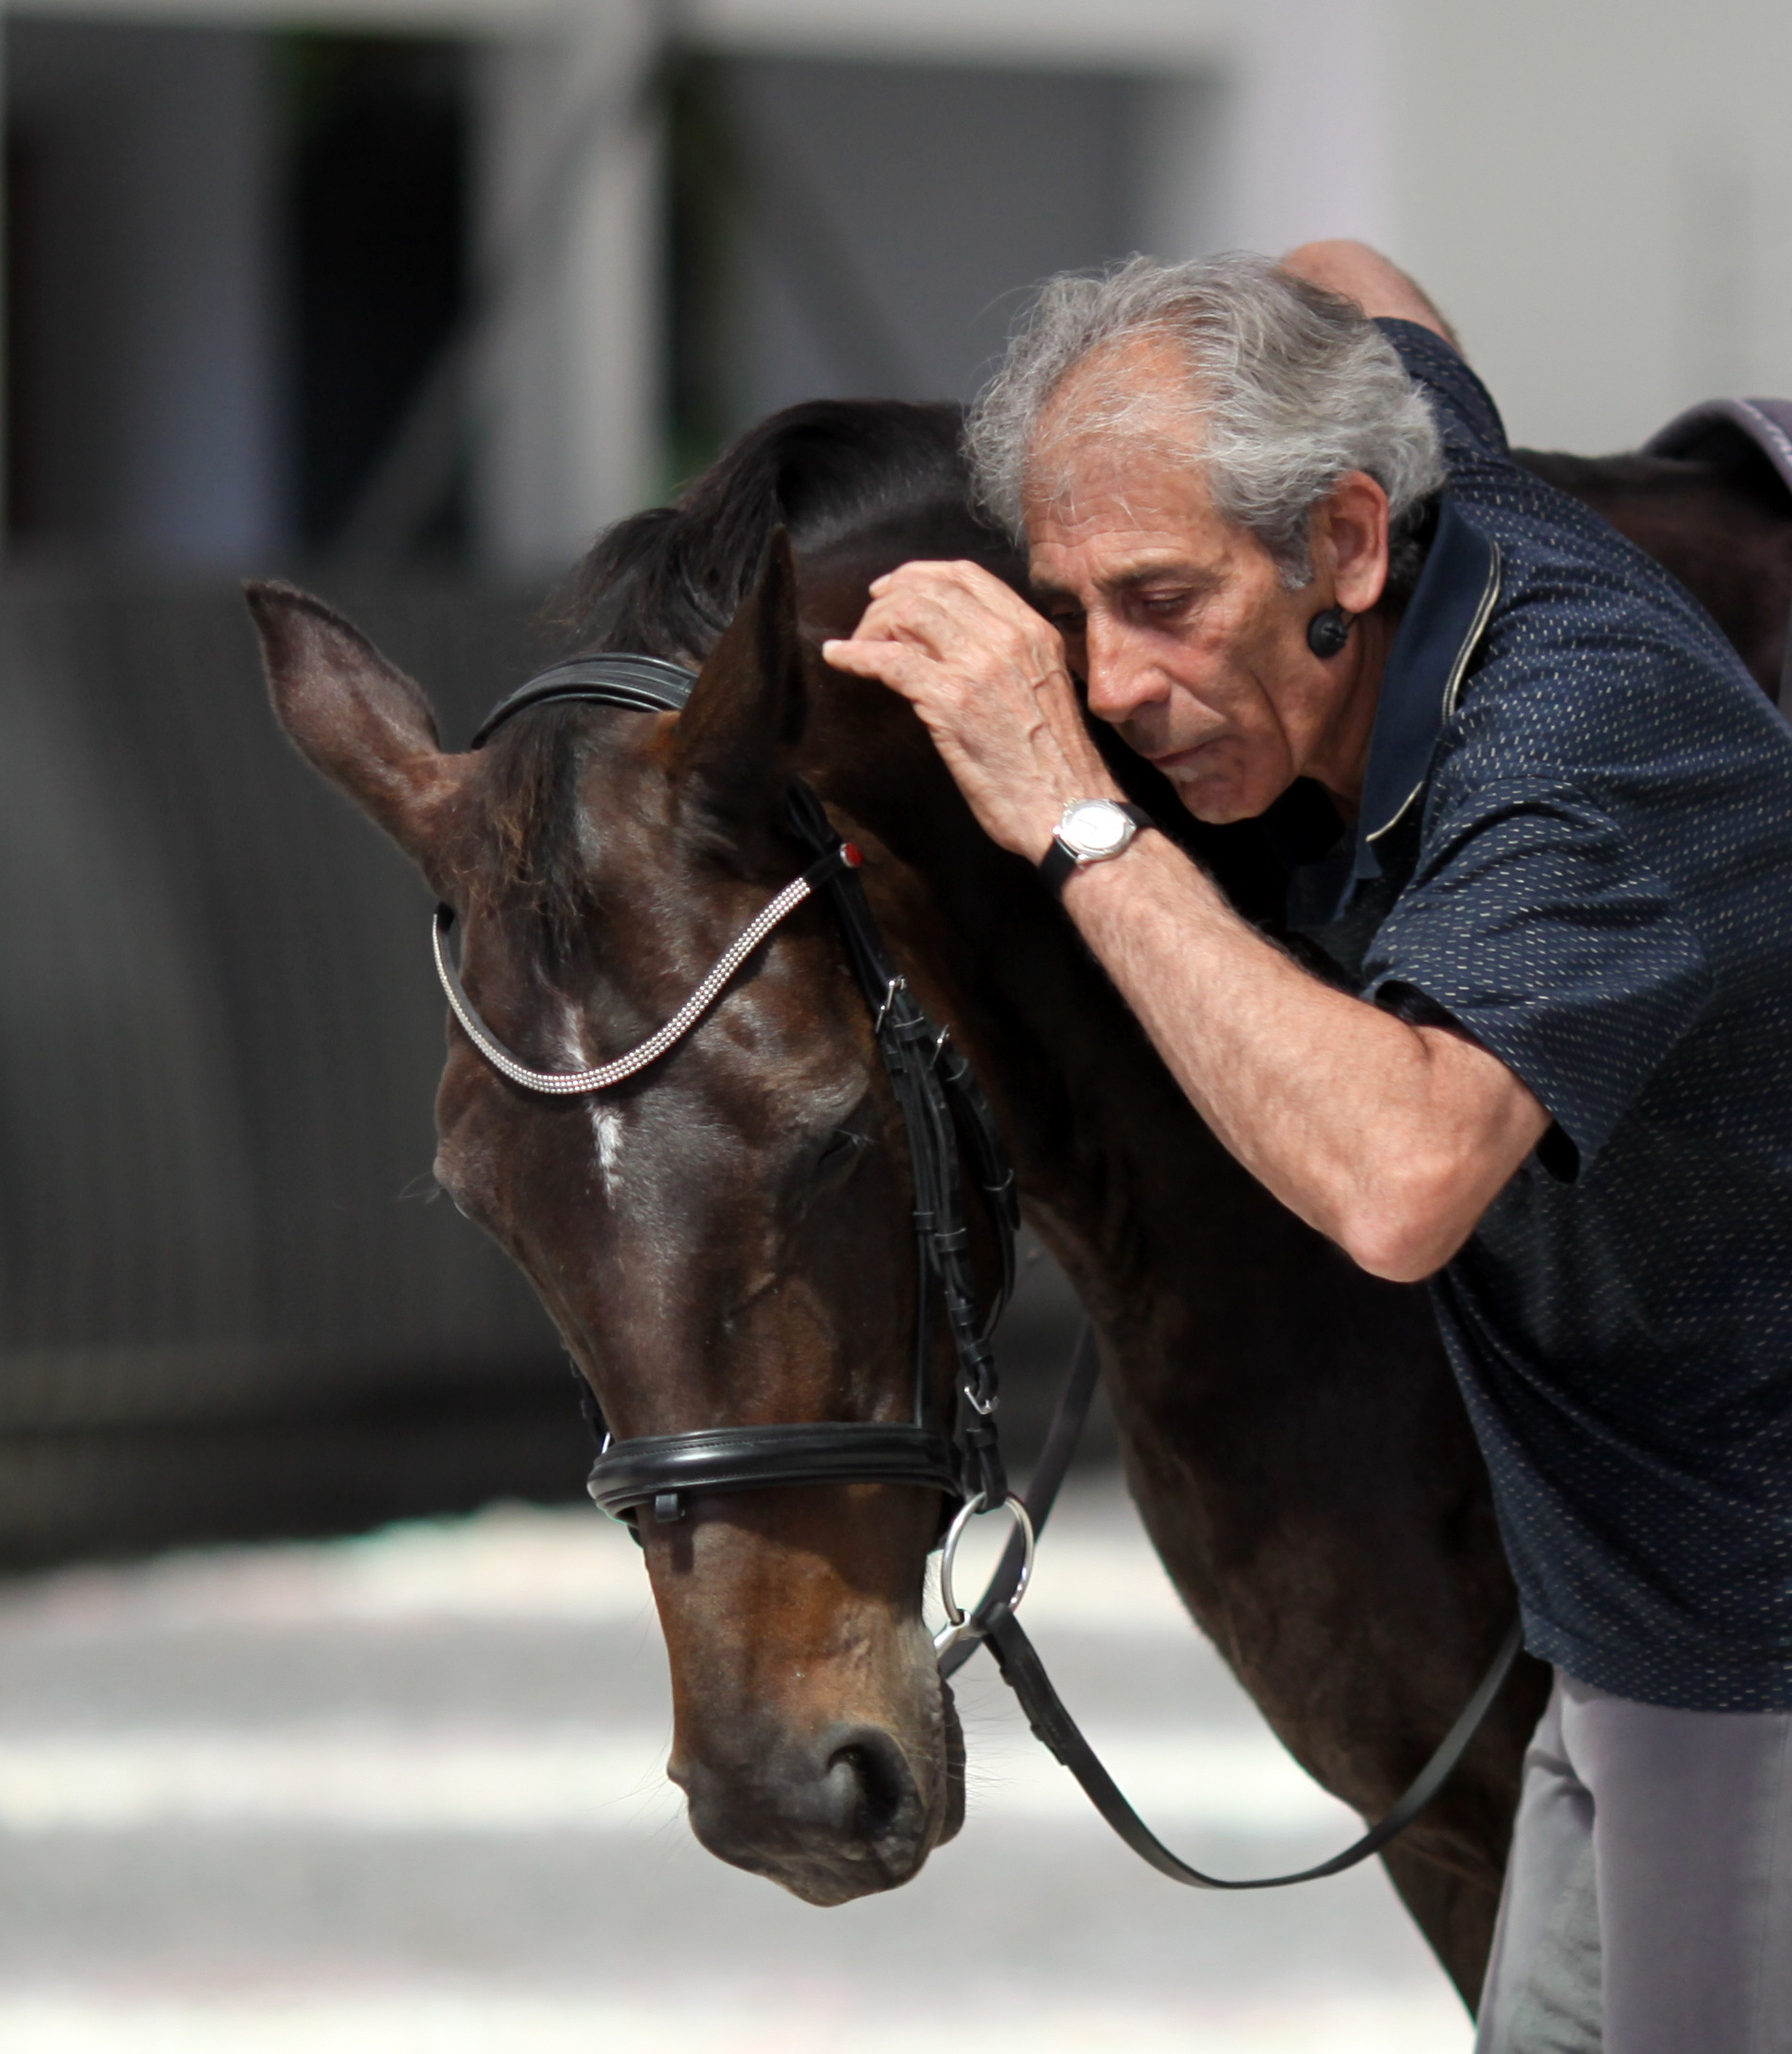 Manolo checking a horse's neck during a clinic